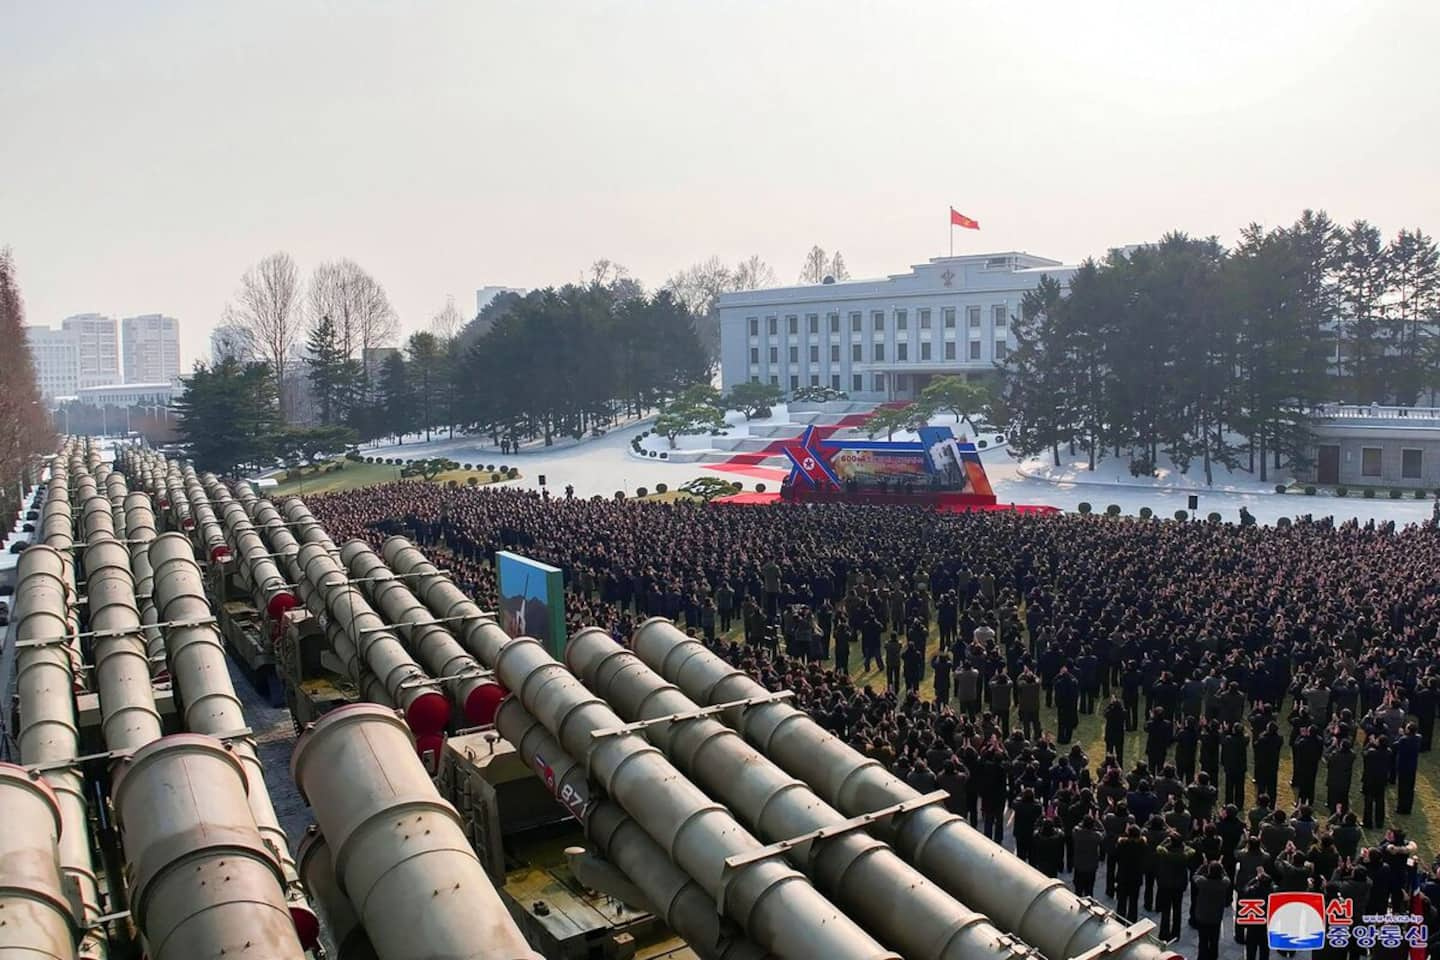 Kim calls for 'exponential increase' of North Korea's nuclear arsenal